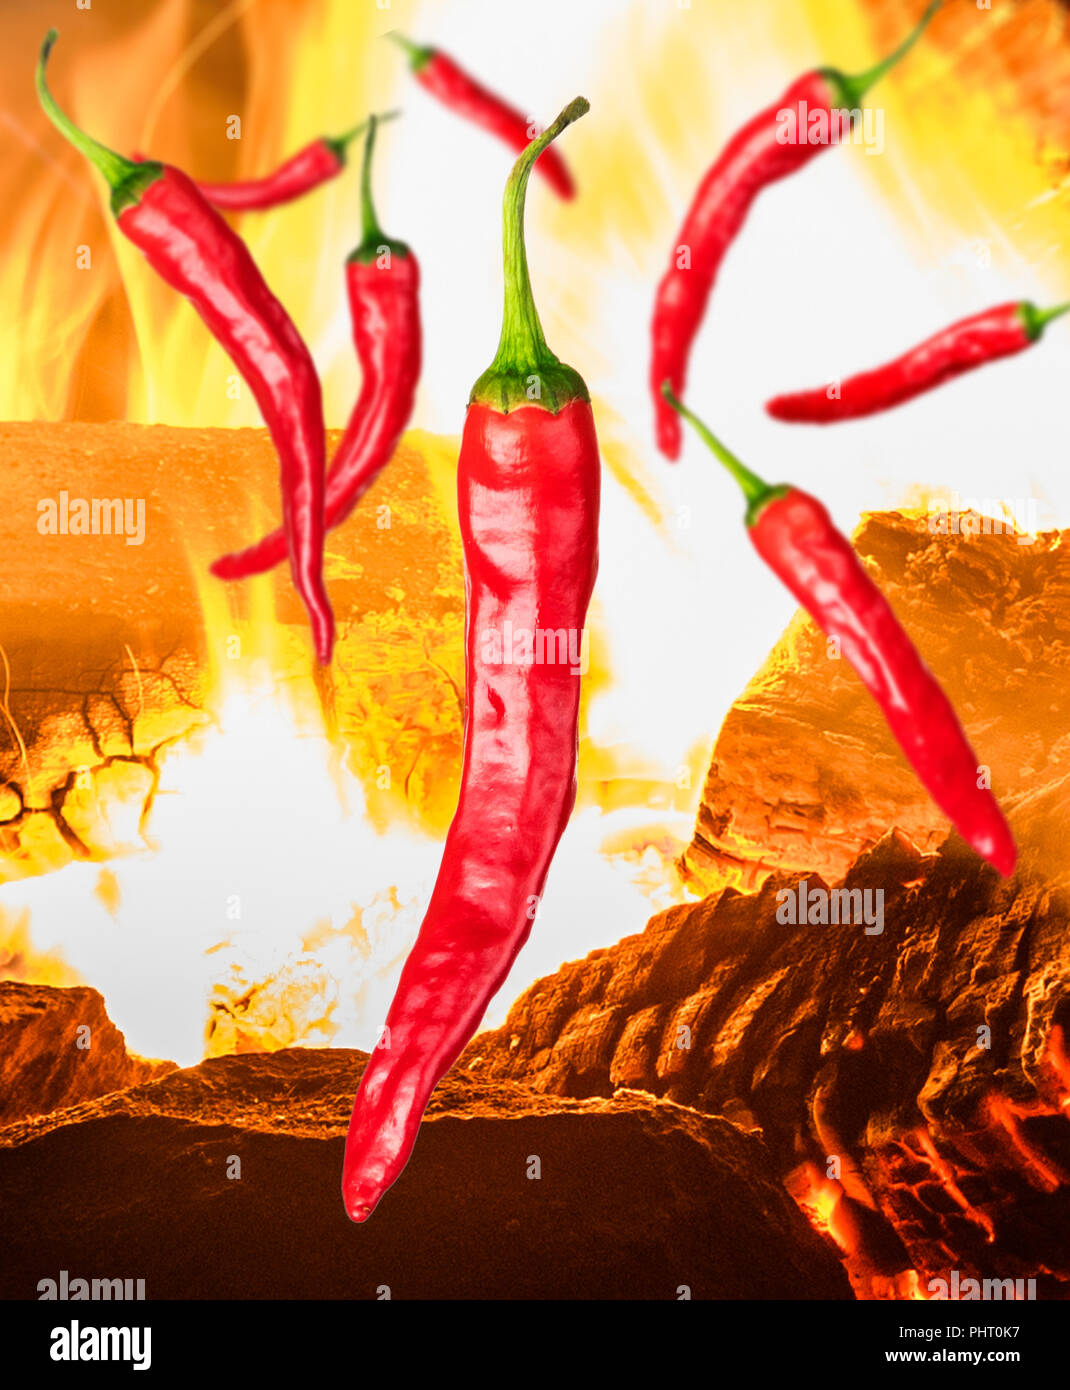 a few pieces of red chili peppers on background with fire Stock Photo